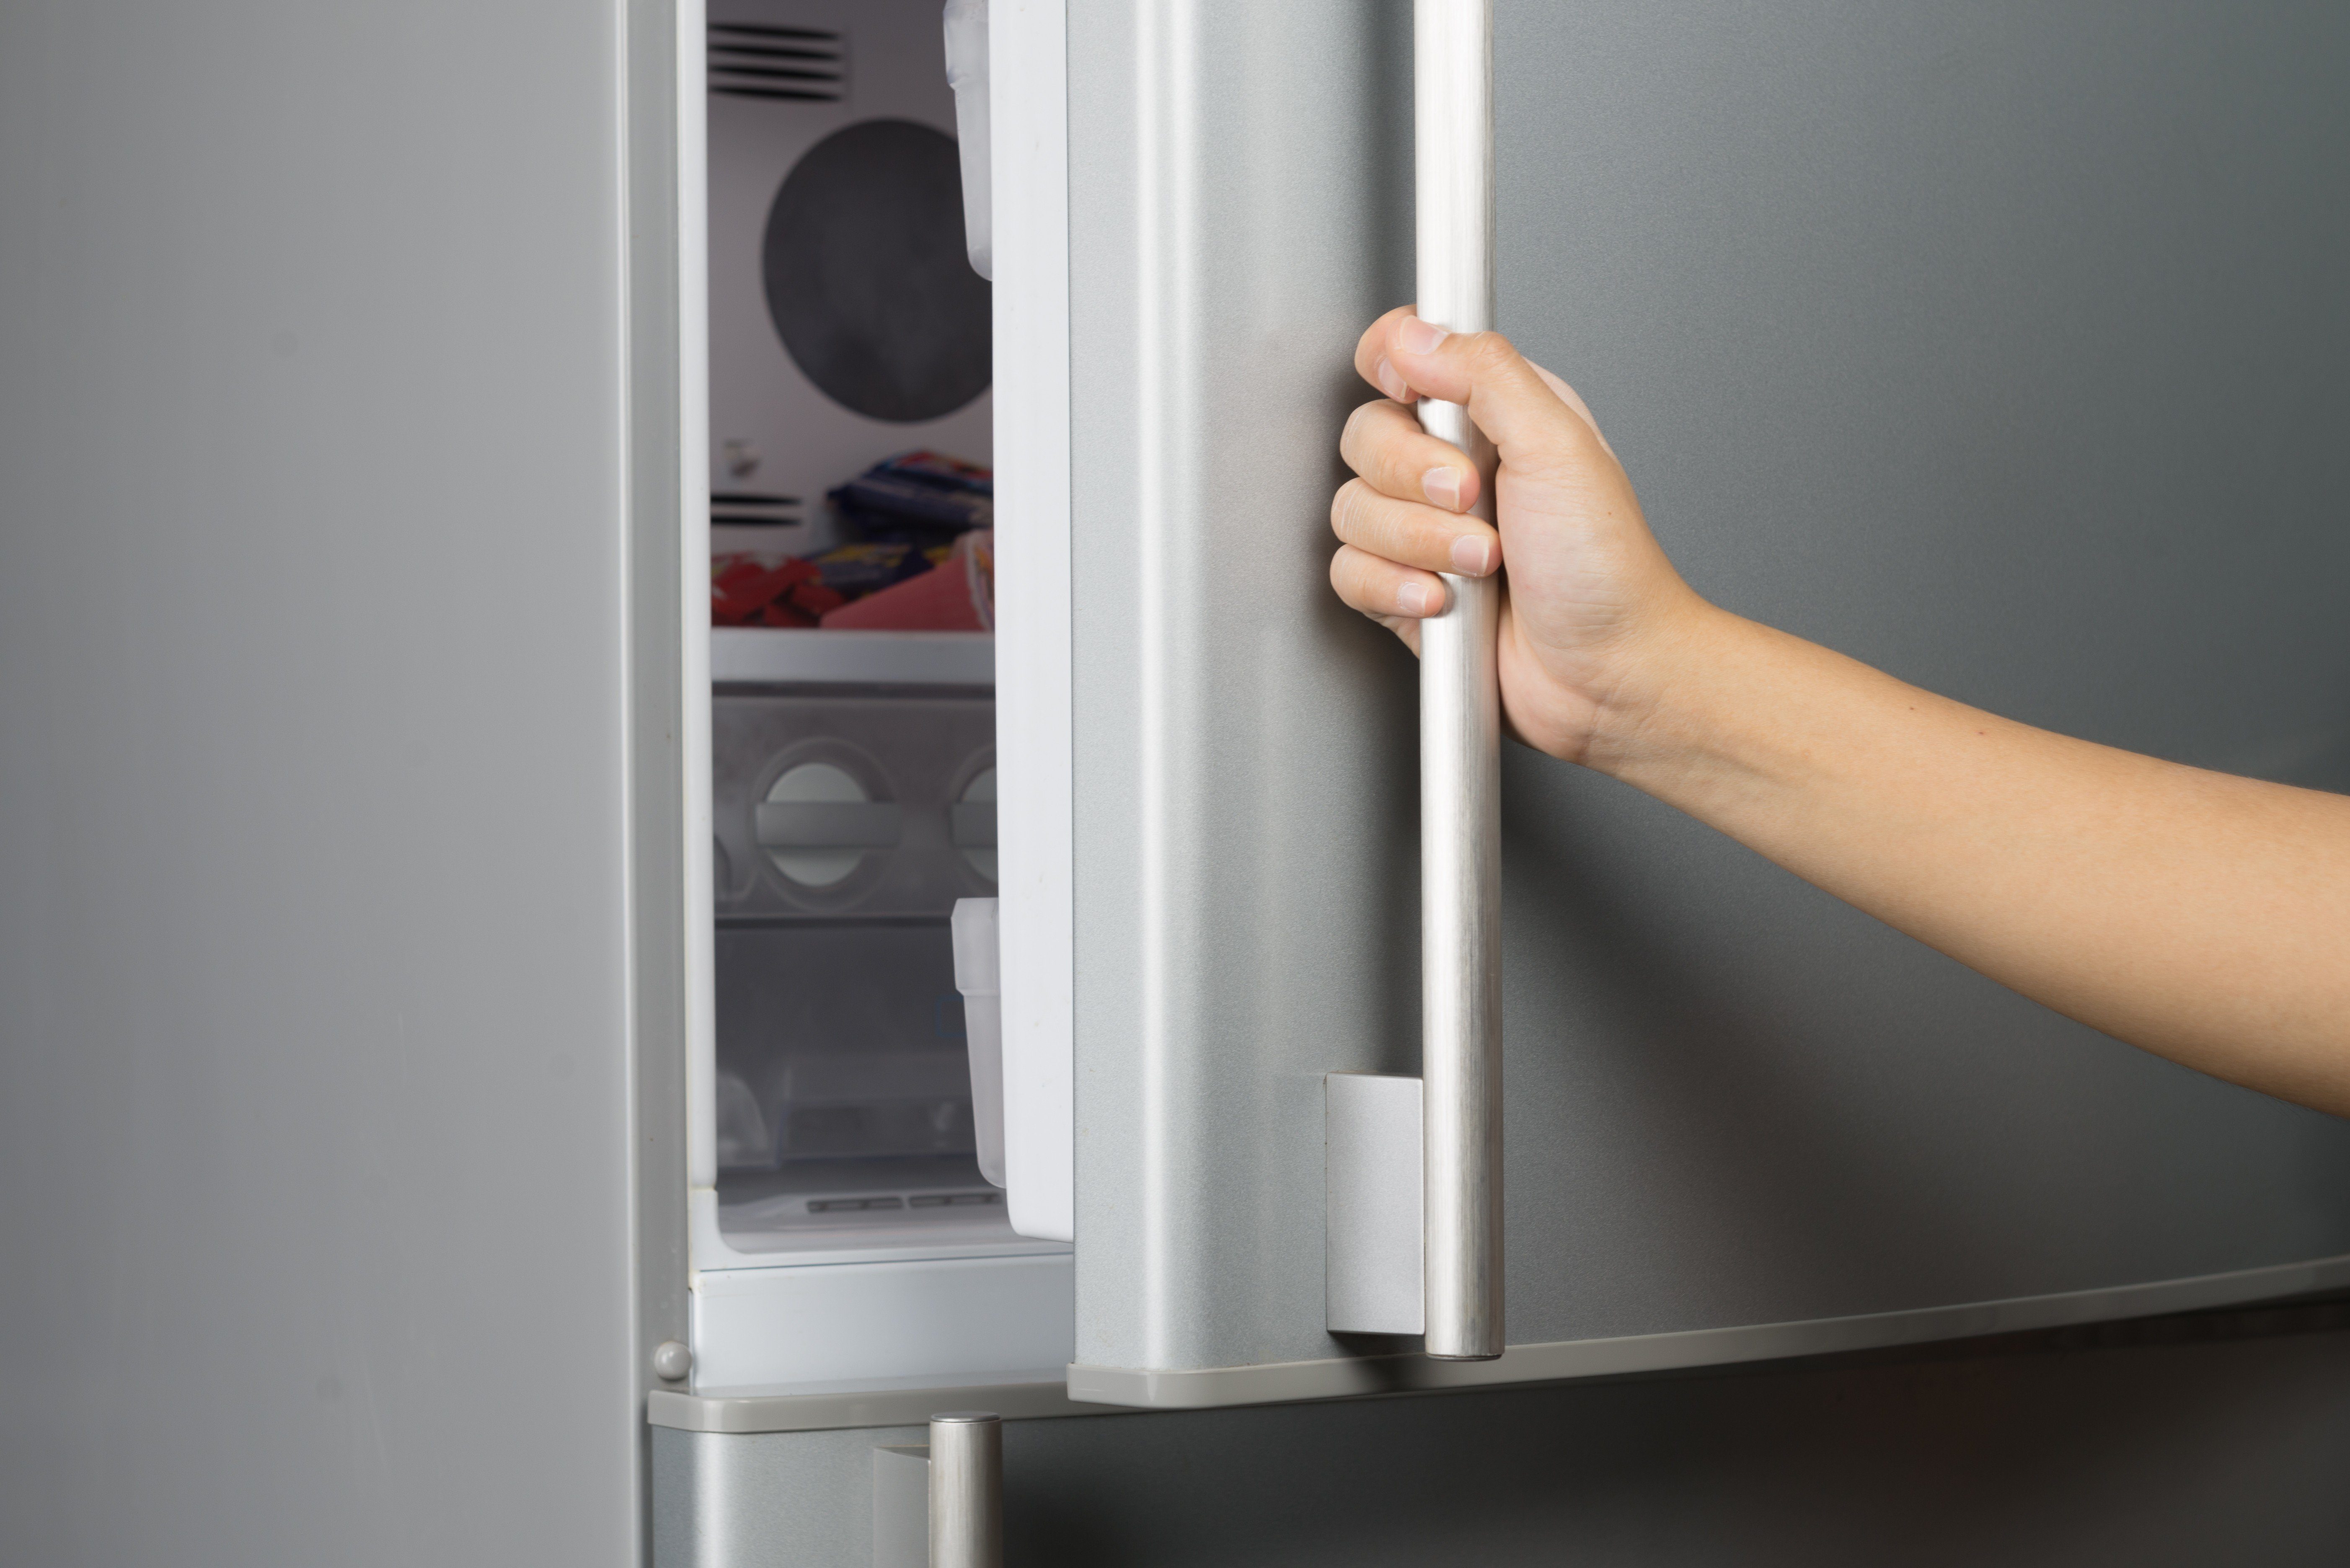 10 Cool Tips for a Garage Refrigerator or Freezer — Family Handyman